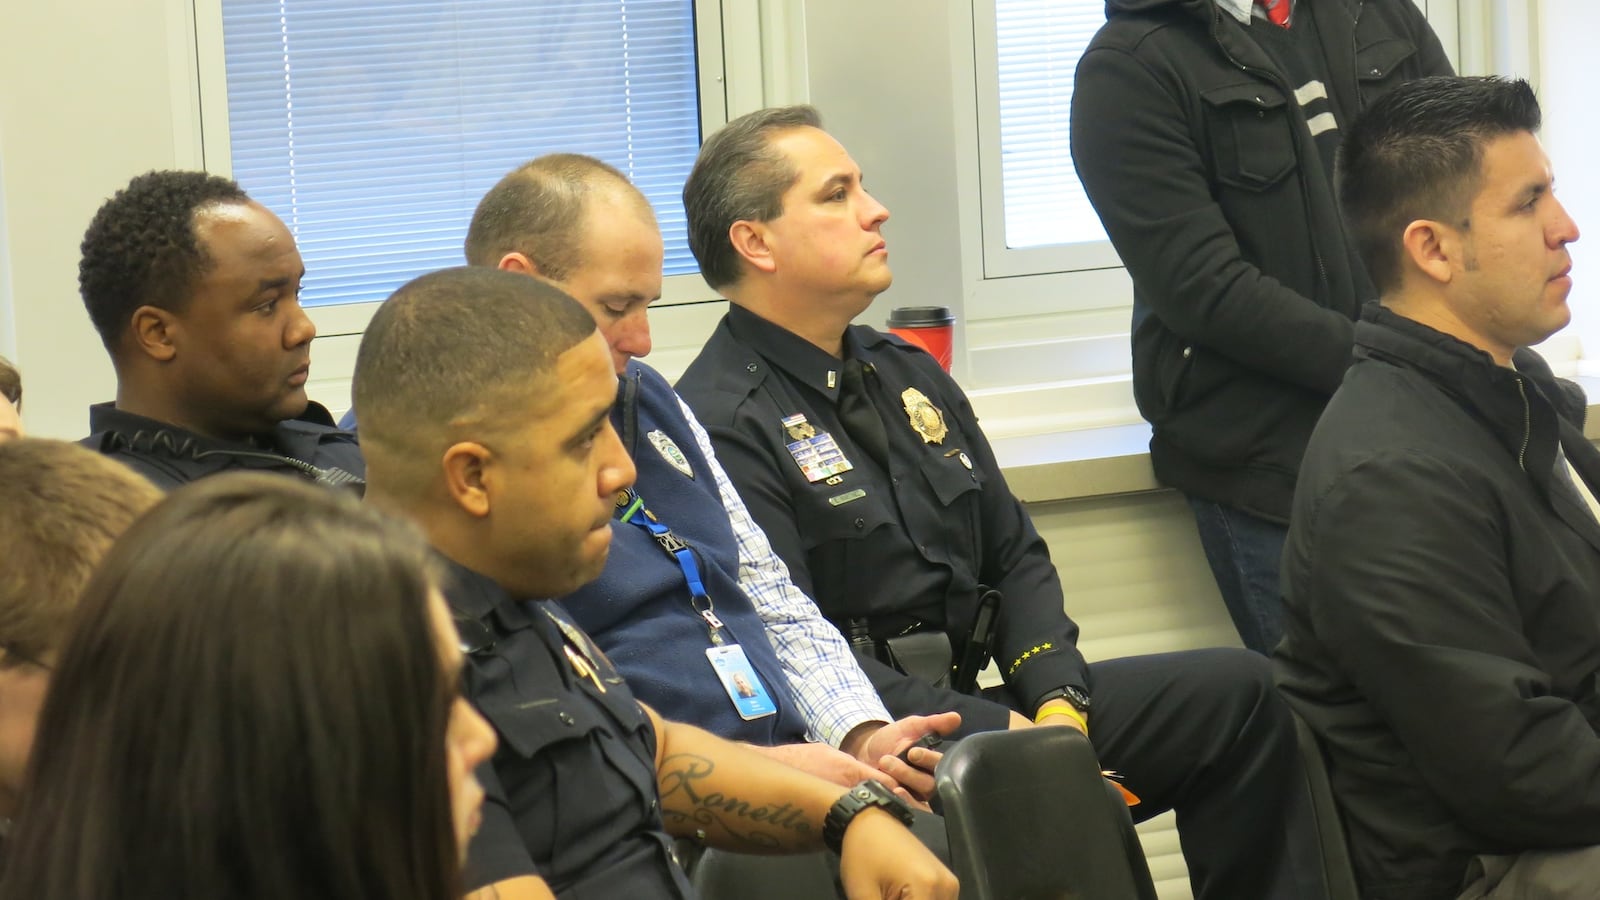 Members of the Denver Police Department watch as students from Manual High School share speeches about Ferguson.